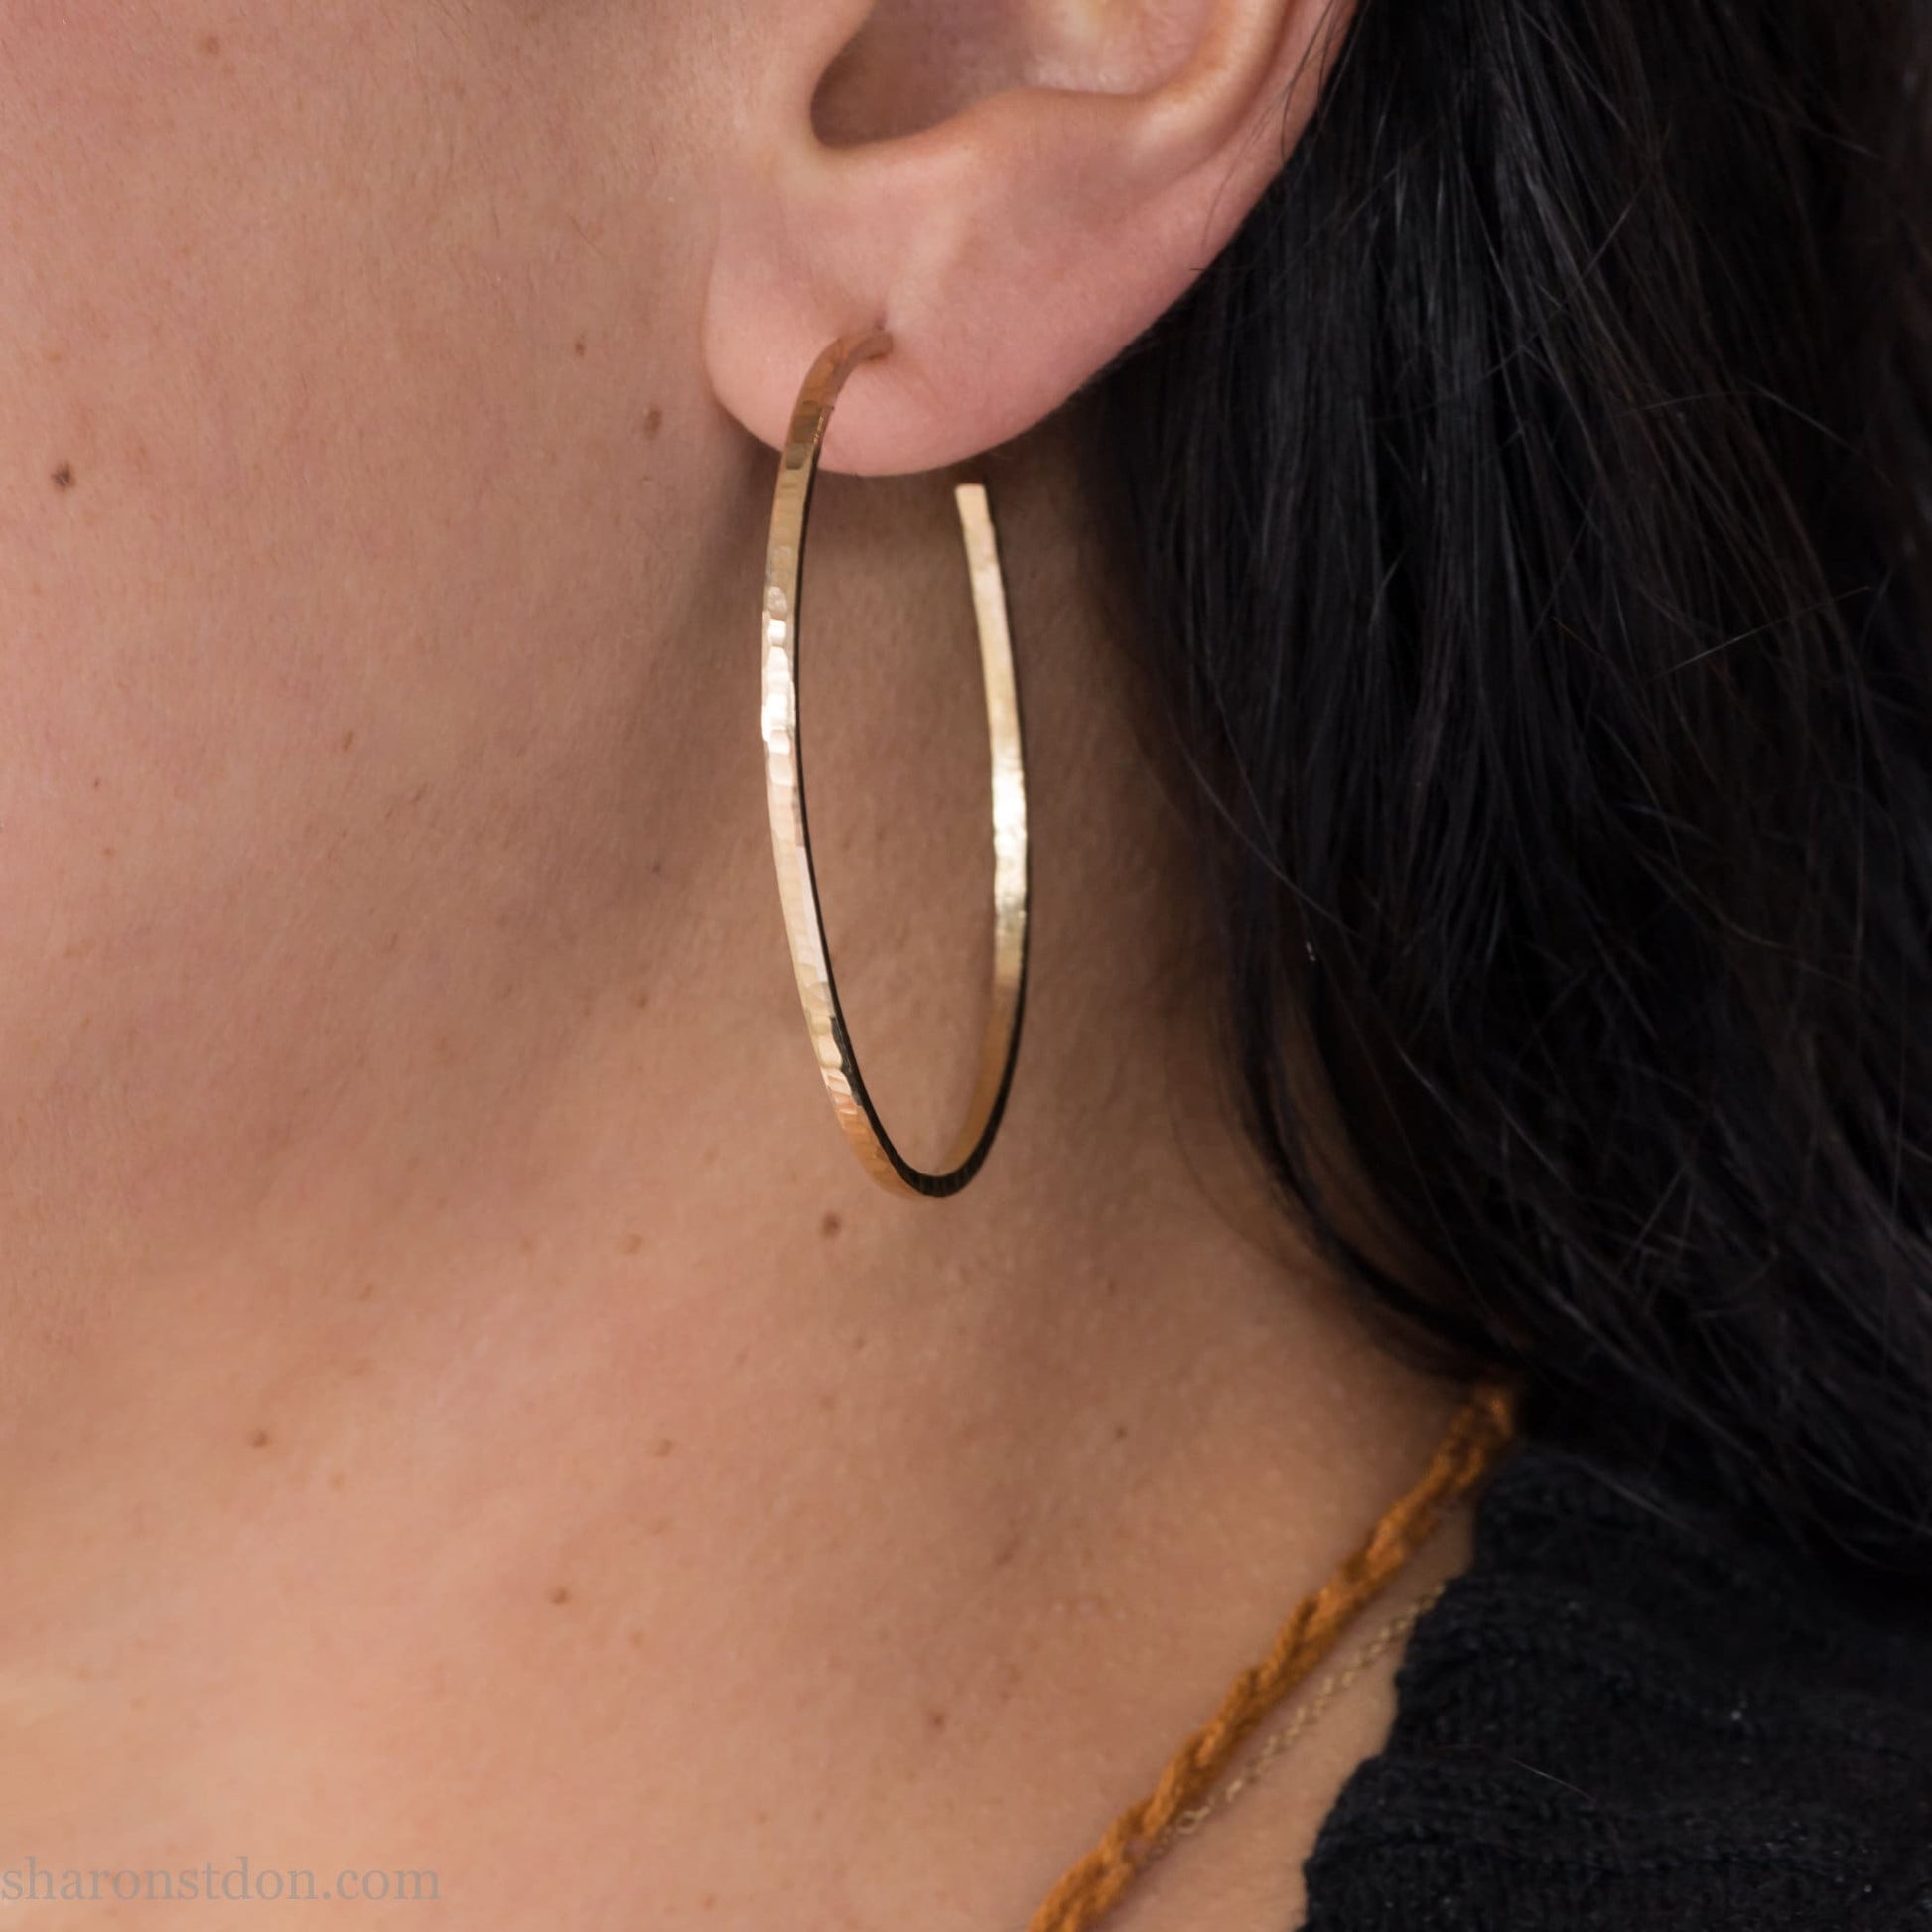 18k yellow gold hoop earrings 50mm diameter, 2mm wide, 1.5mm thick. High quality, handmade with hammered texture.